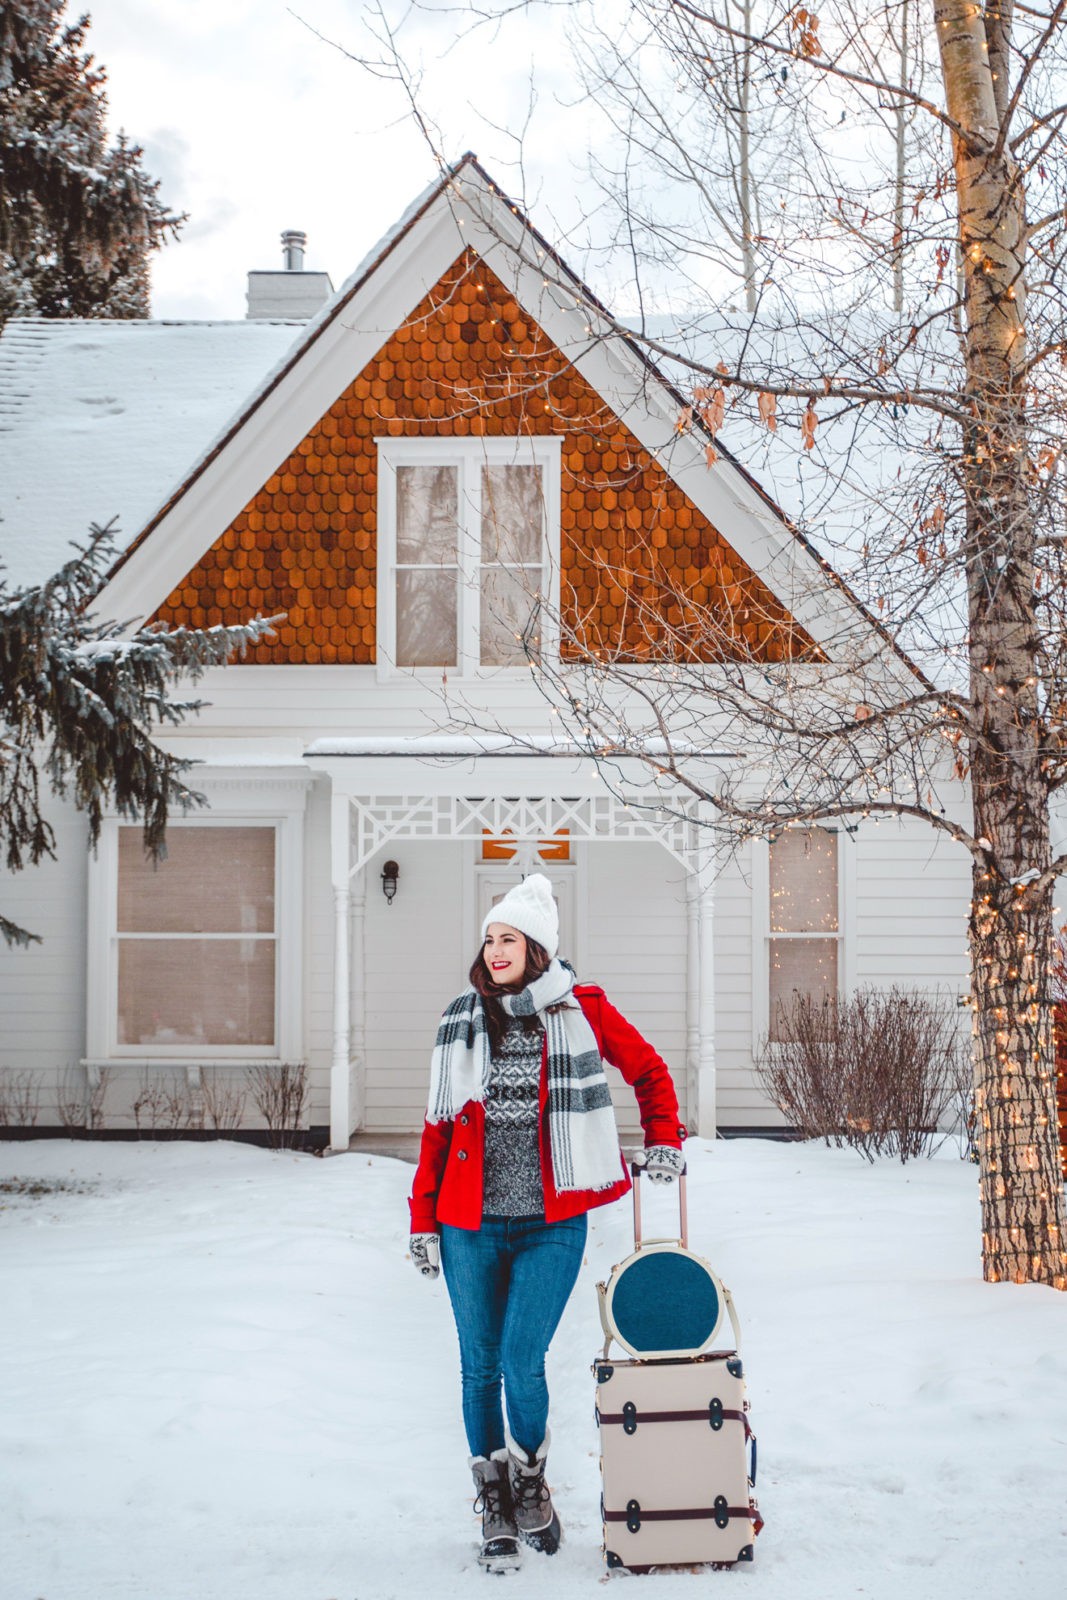 Aspen Ski Trip Packing List by Travel Blogger Laura Lily,